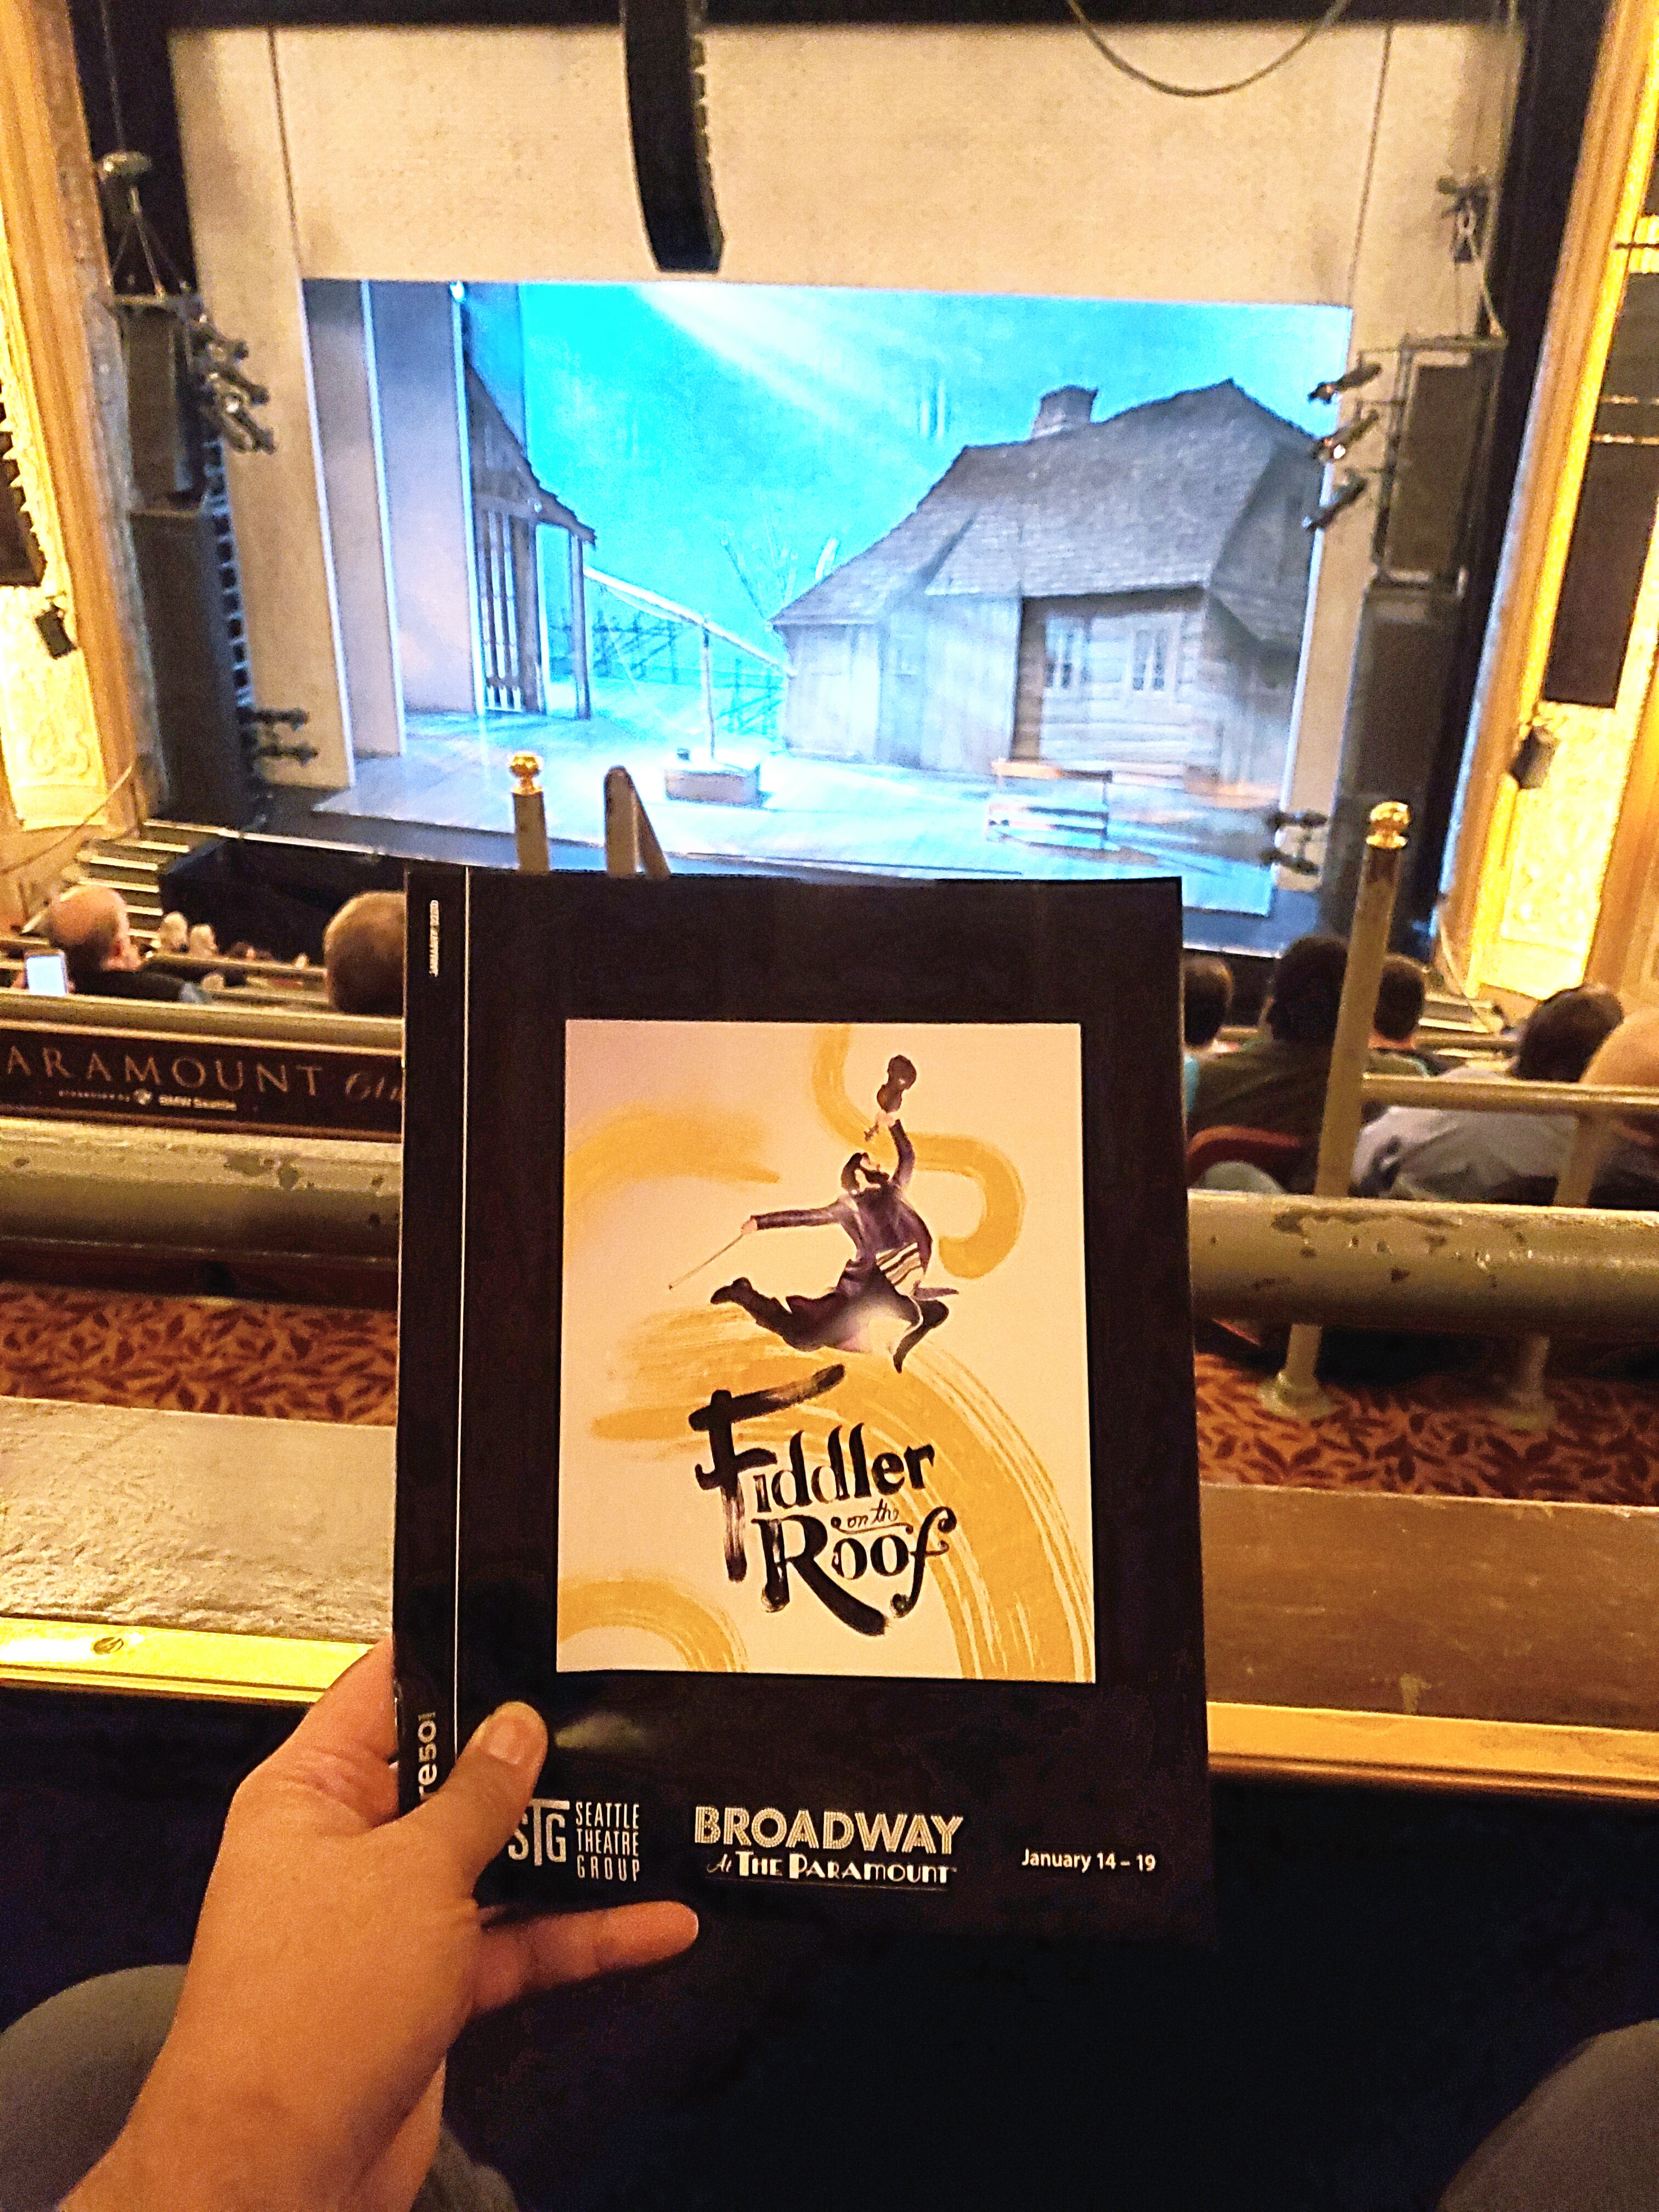 Fiddler on the Roof at Paramount Theatre w/ Andres & Eyal. #Slow, unexciting, & #educational. But great #traditional #jewish choreography. Loved the #yiddish expressions. #tradition